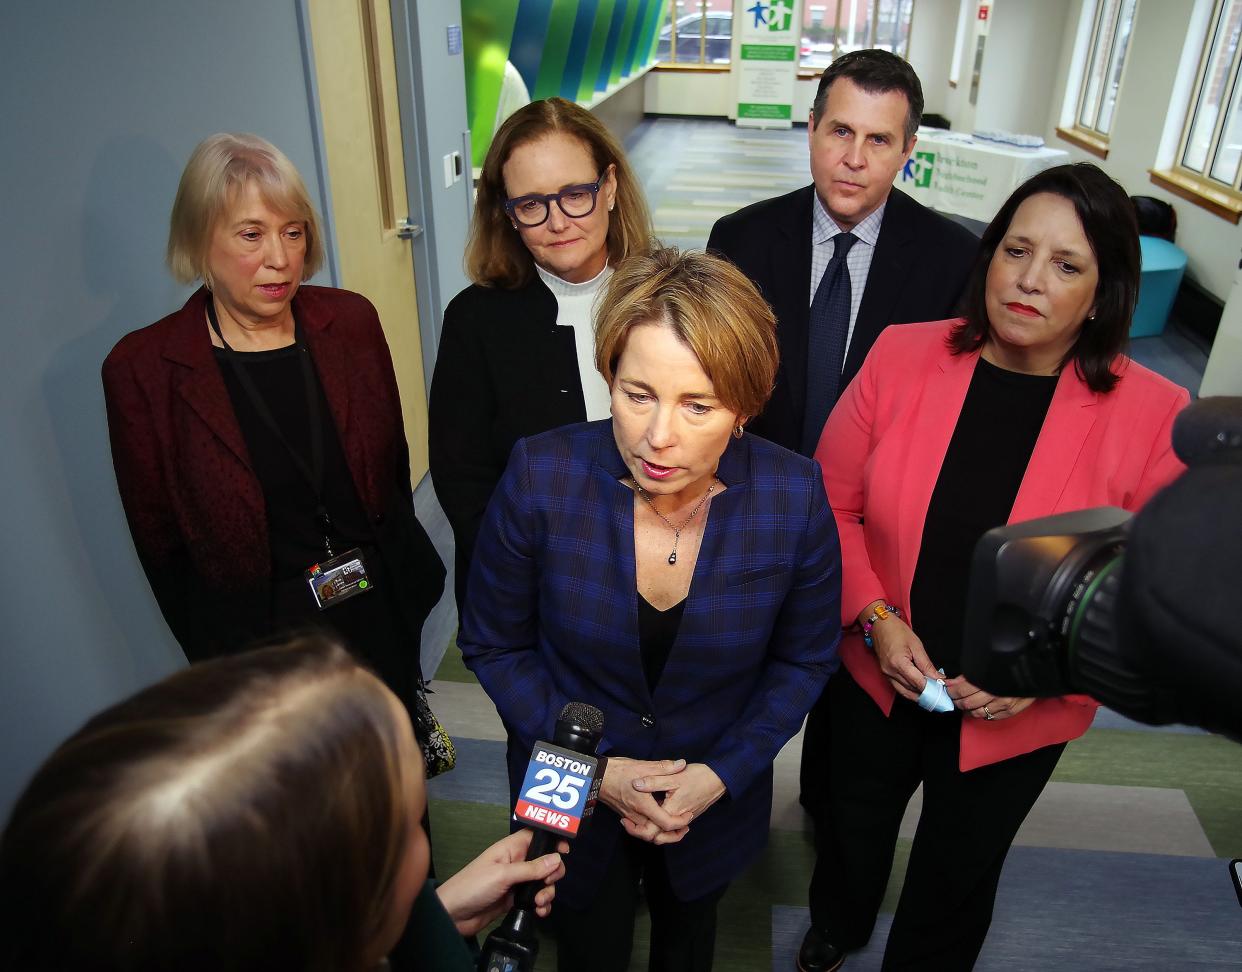 Brockton Neighborhood Health Center CEO Sue Joss, Mass. Health & Human Services Secretary Kate Walsh, Mayor Robert Sullivan, and Lt. Governor Kim Driscoll, stand behind Gov. Maura Healey on a visit to the health center on Thursday, March 2, 2023.